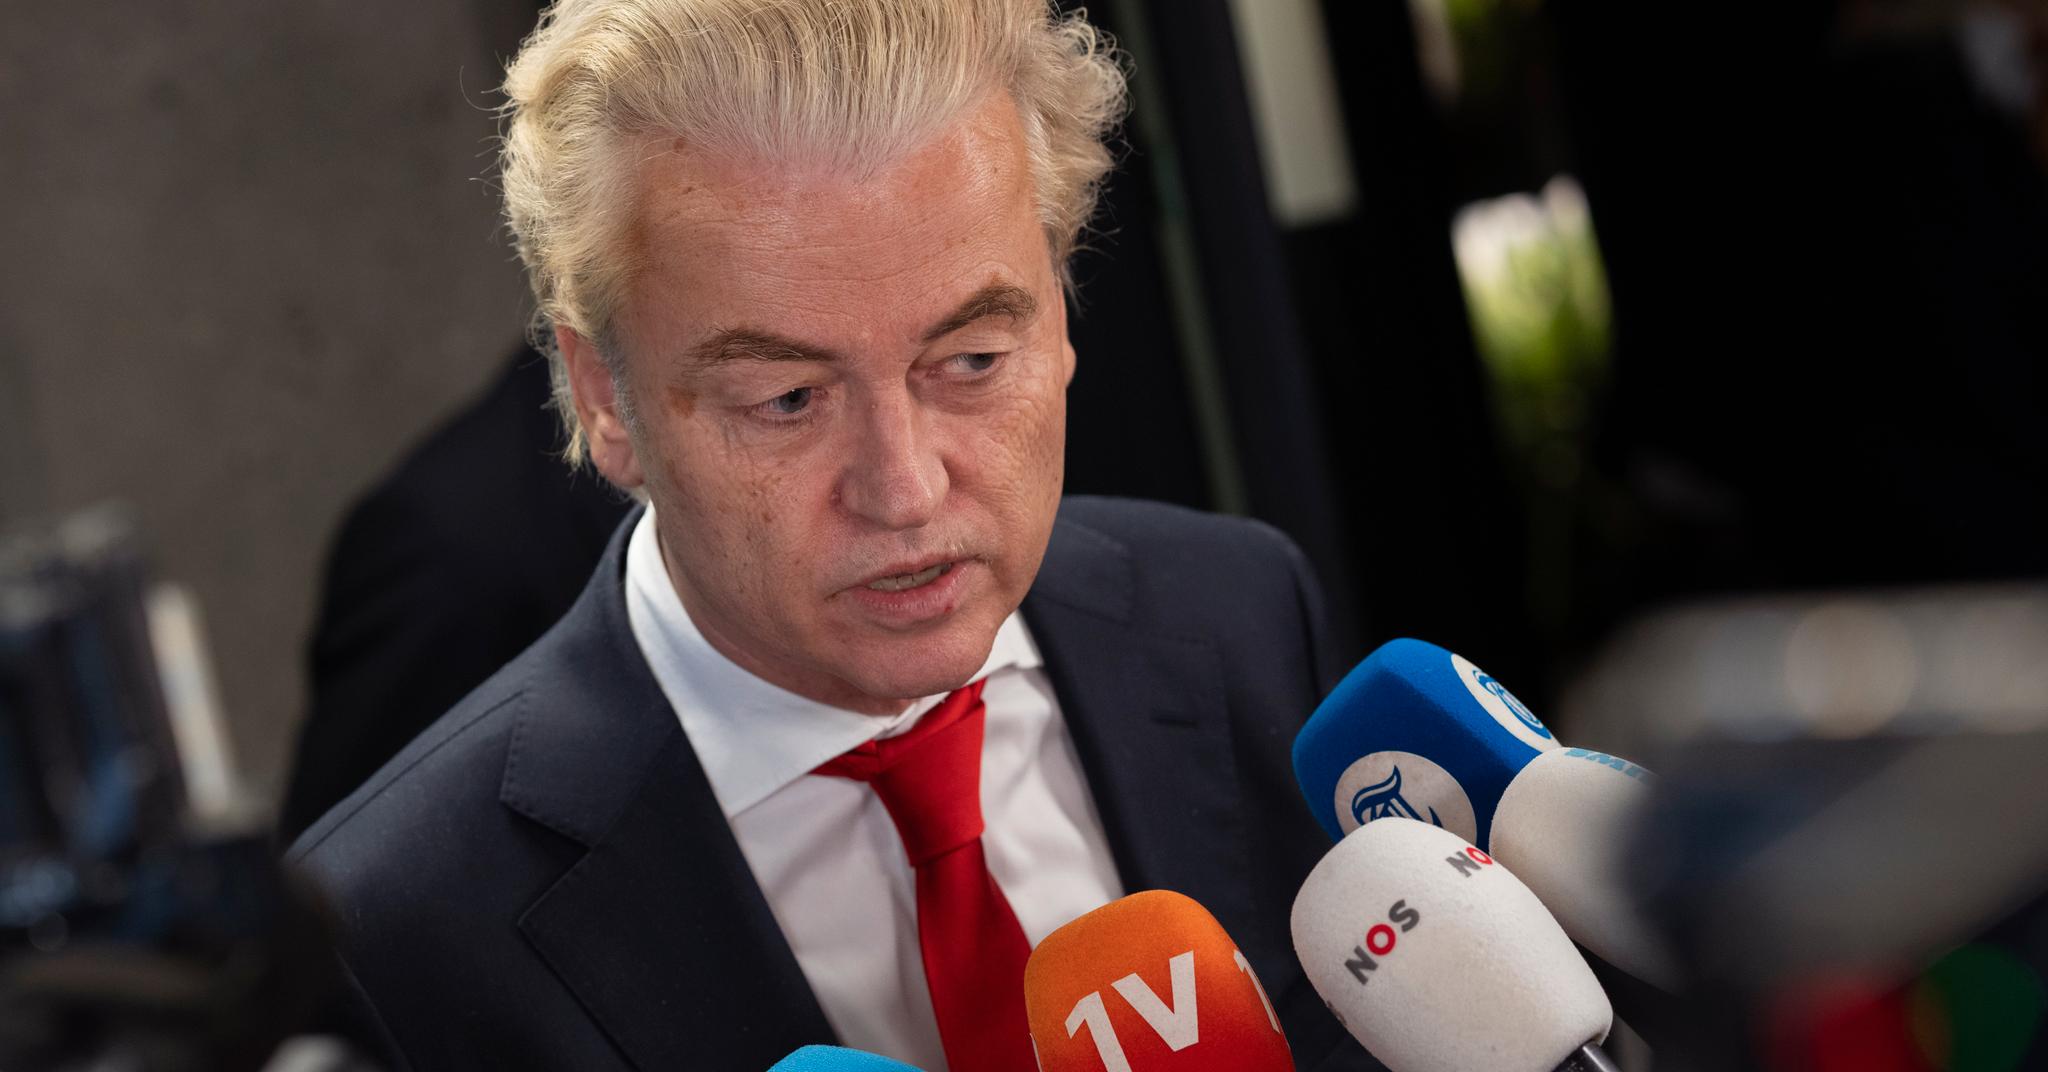 Geert Wilders Abandons Dream of Becoming Dutch Prime Minister, Calls Decision ‘Undemocratic’